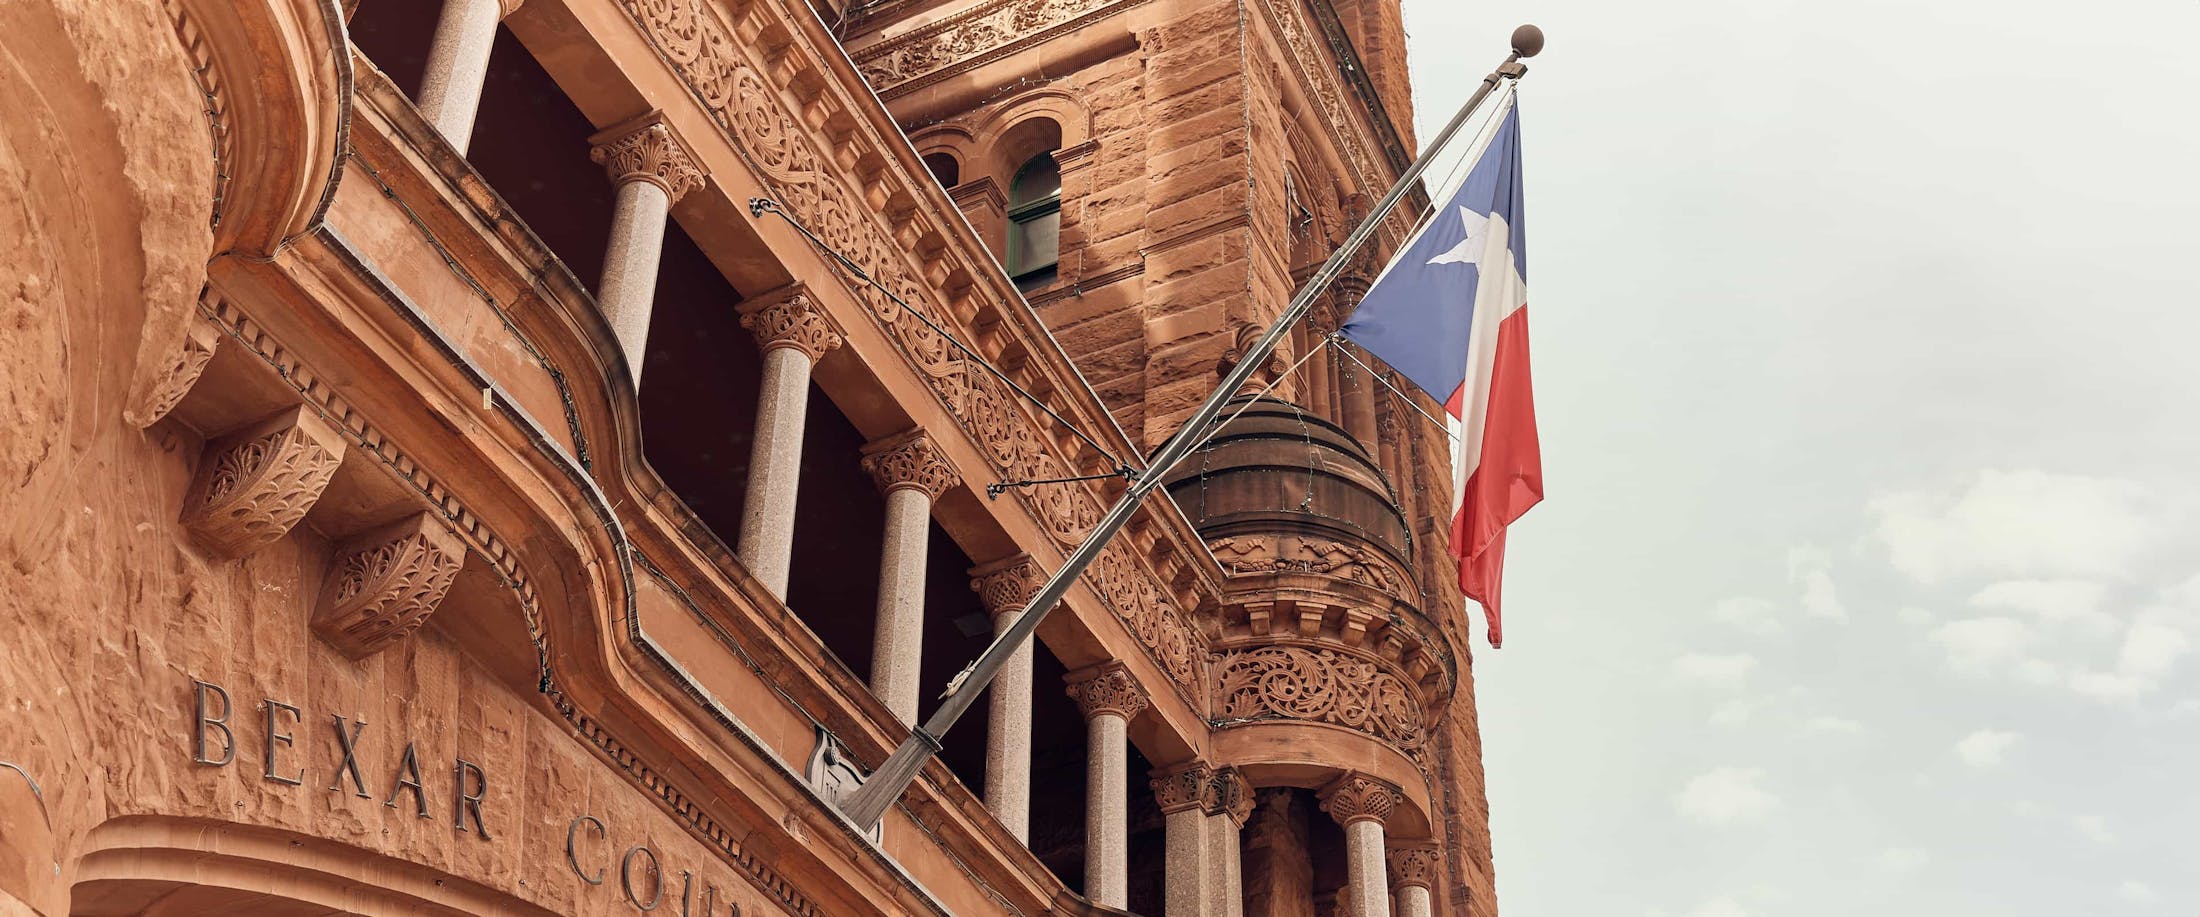 View of Texas flag